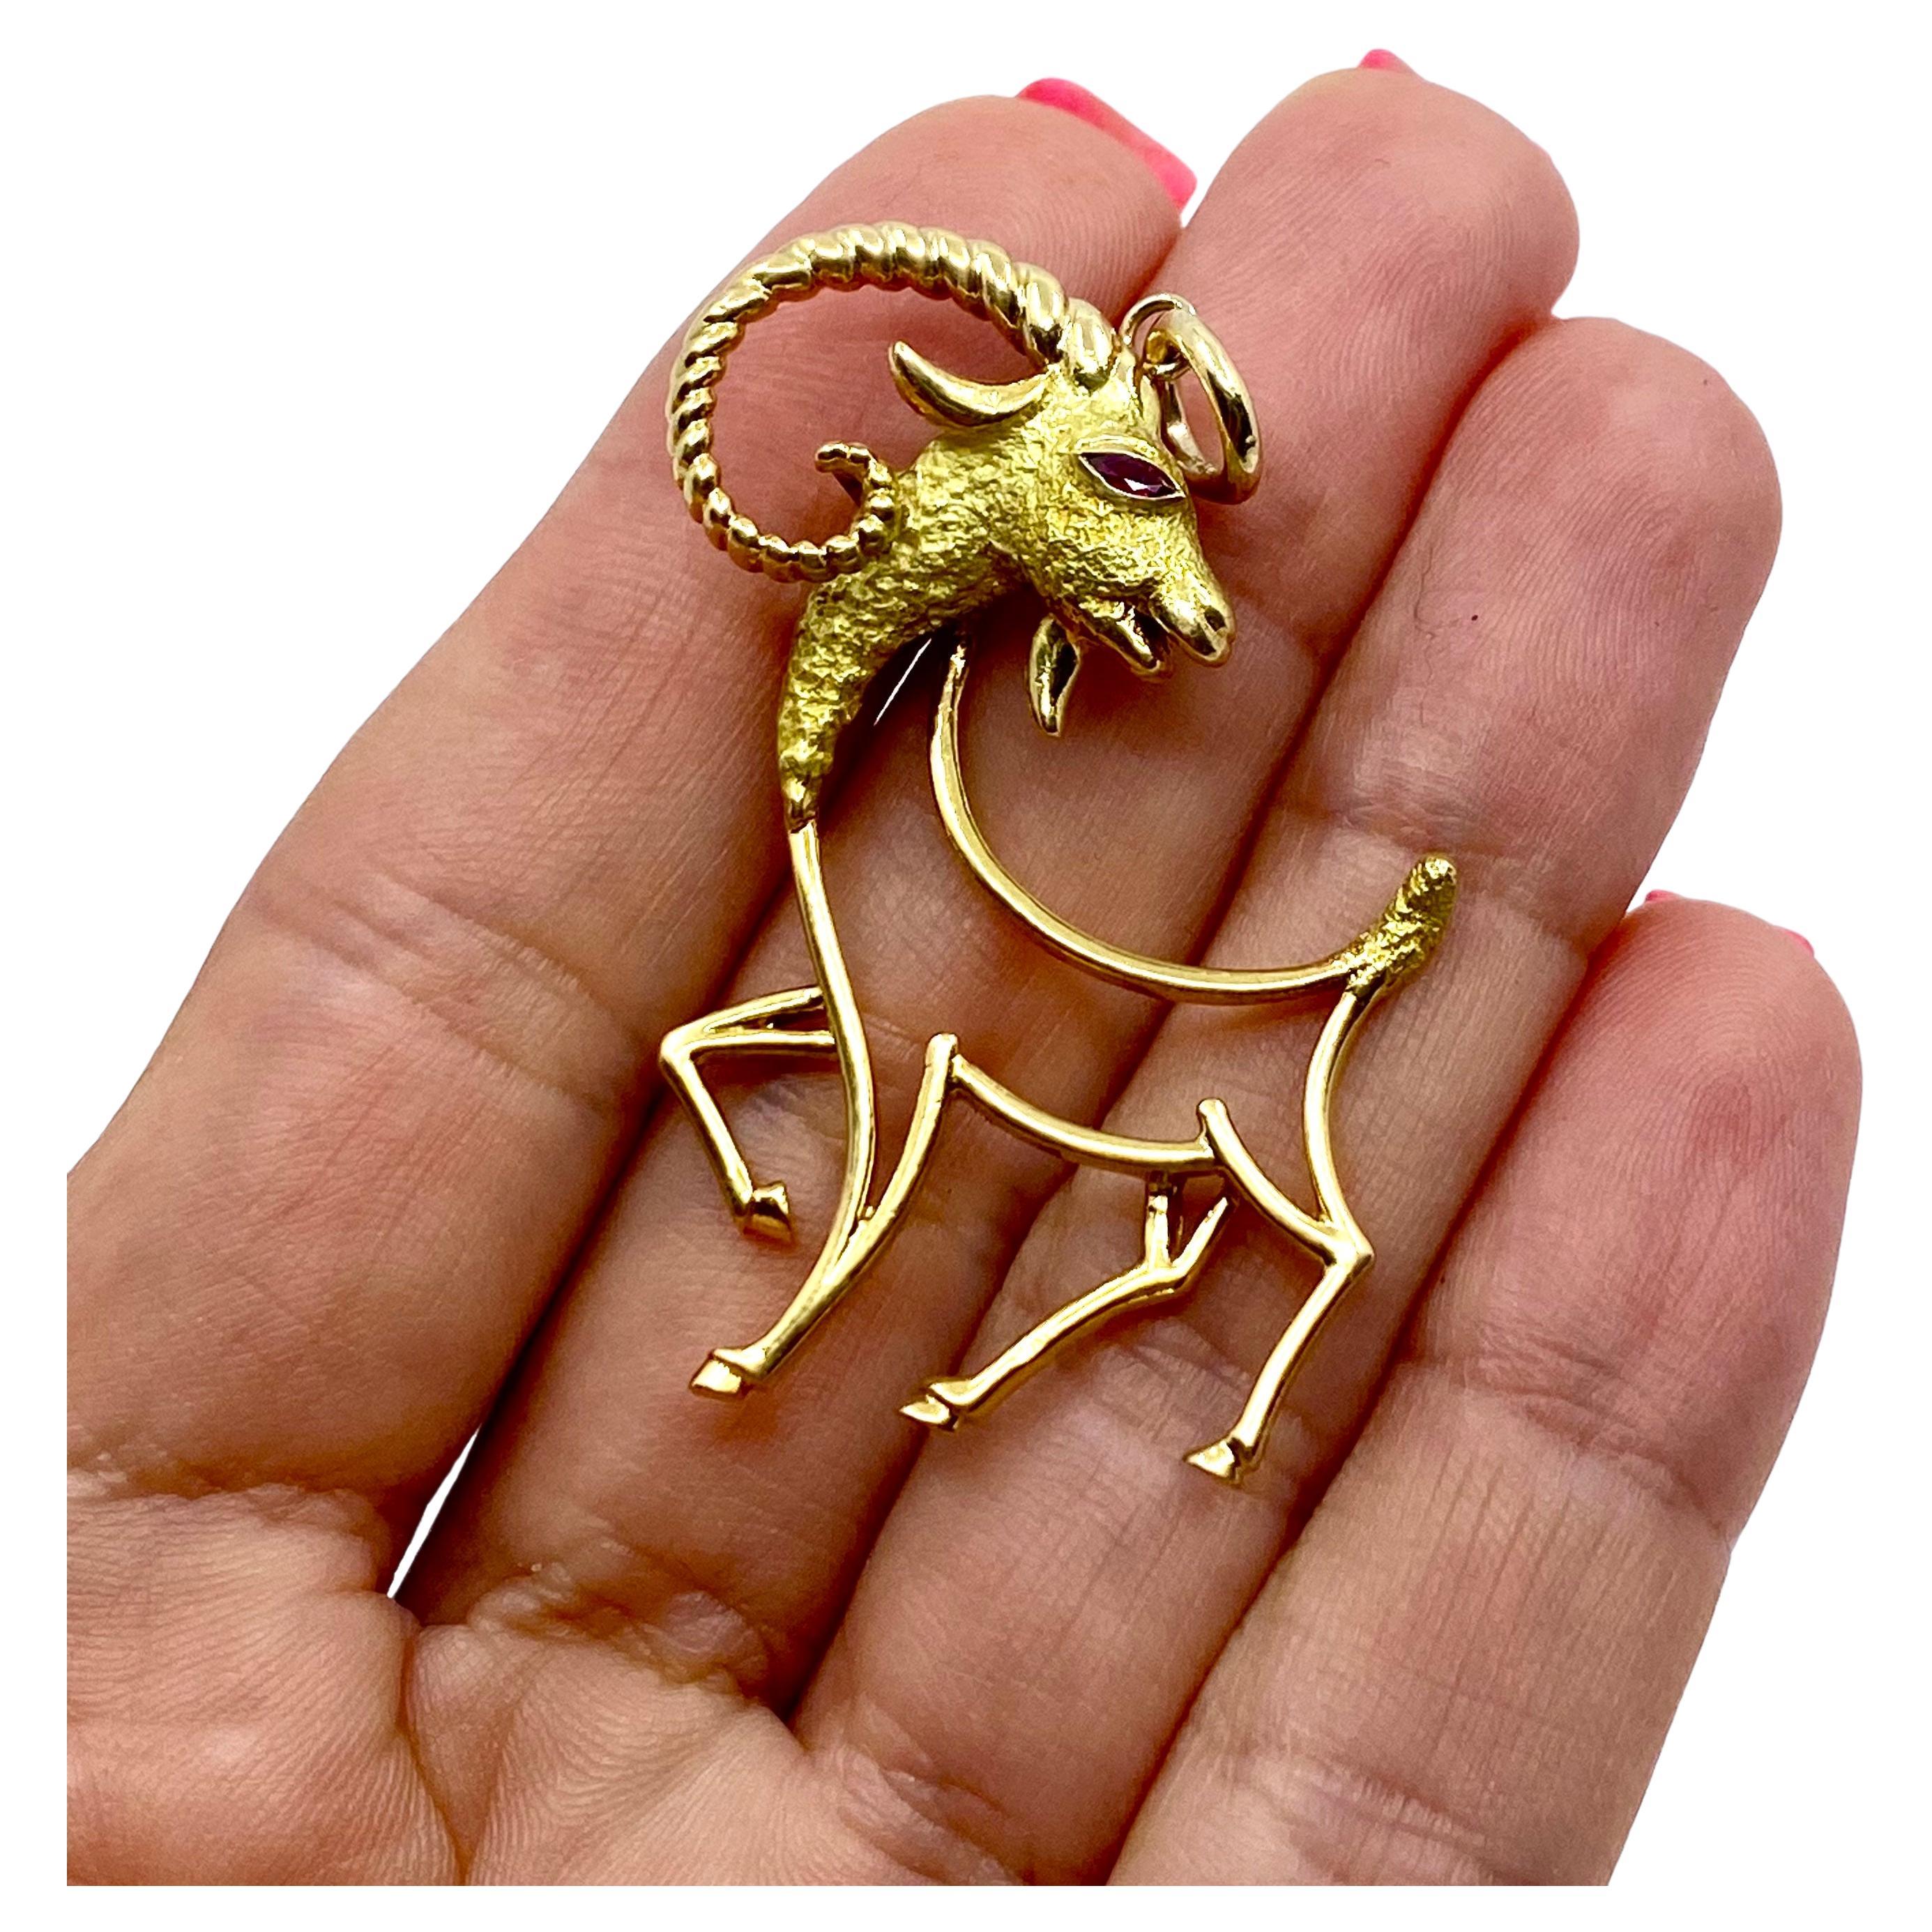 
A graceful 18k gold Capricorn pendant made of 18k gold, featuring ruby. This vintage pendant is crafted in the form of an openwork ibex silhouette. The head is beautifully made of textured gold with the swirled, polished gold horns. The eye